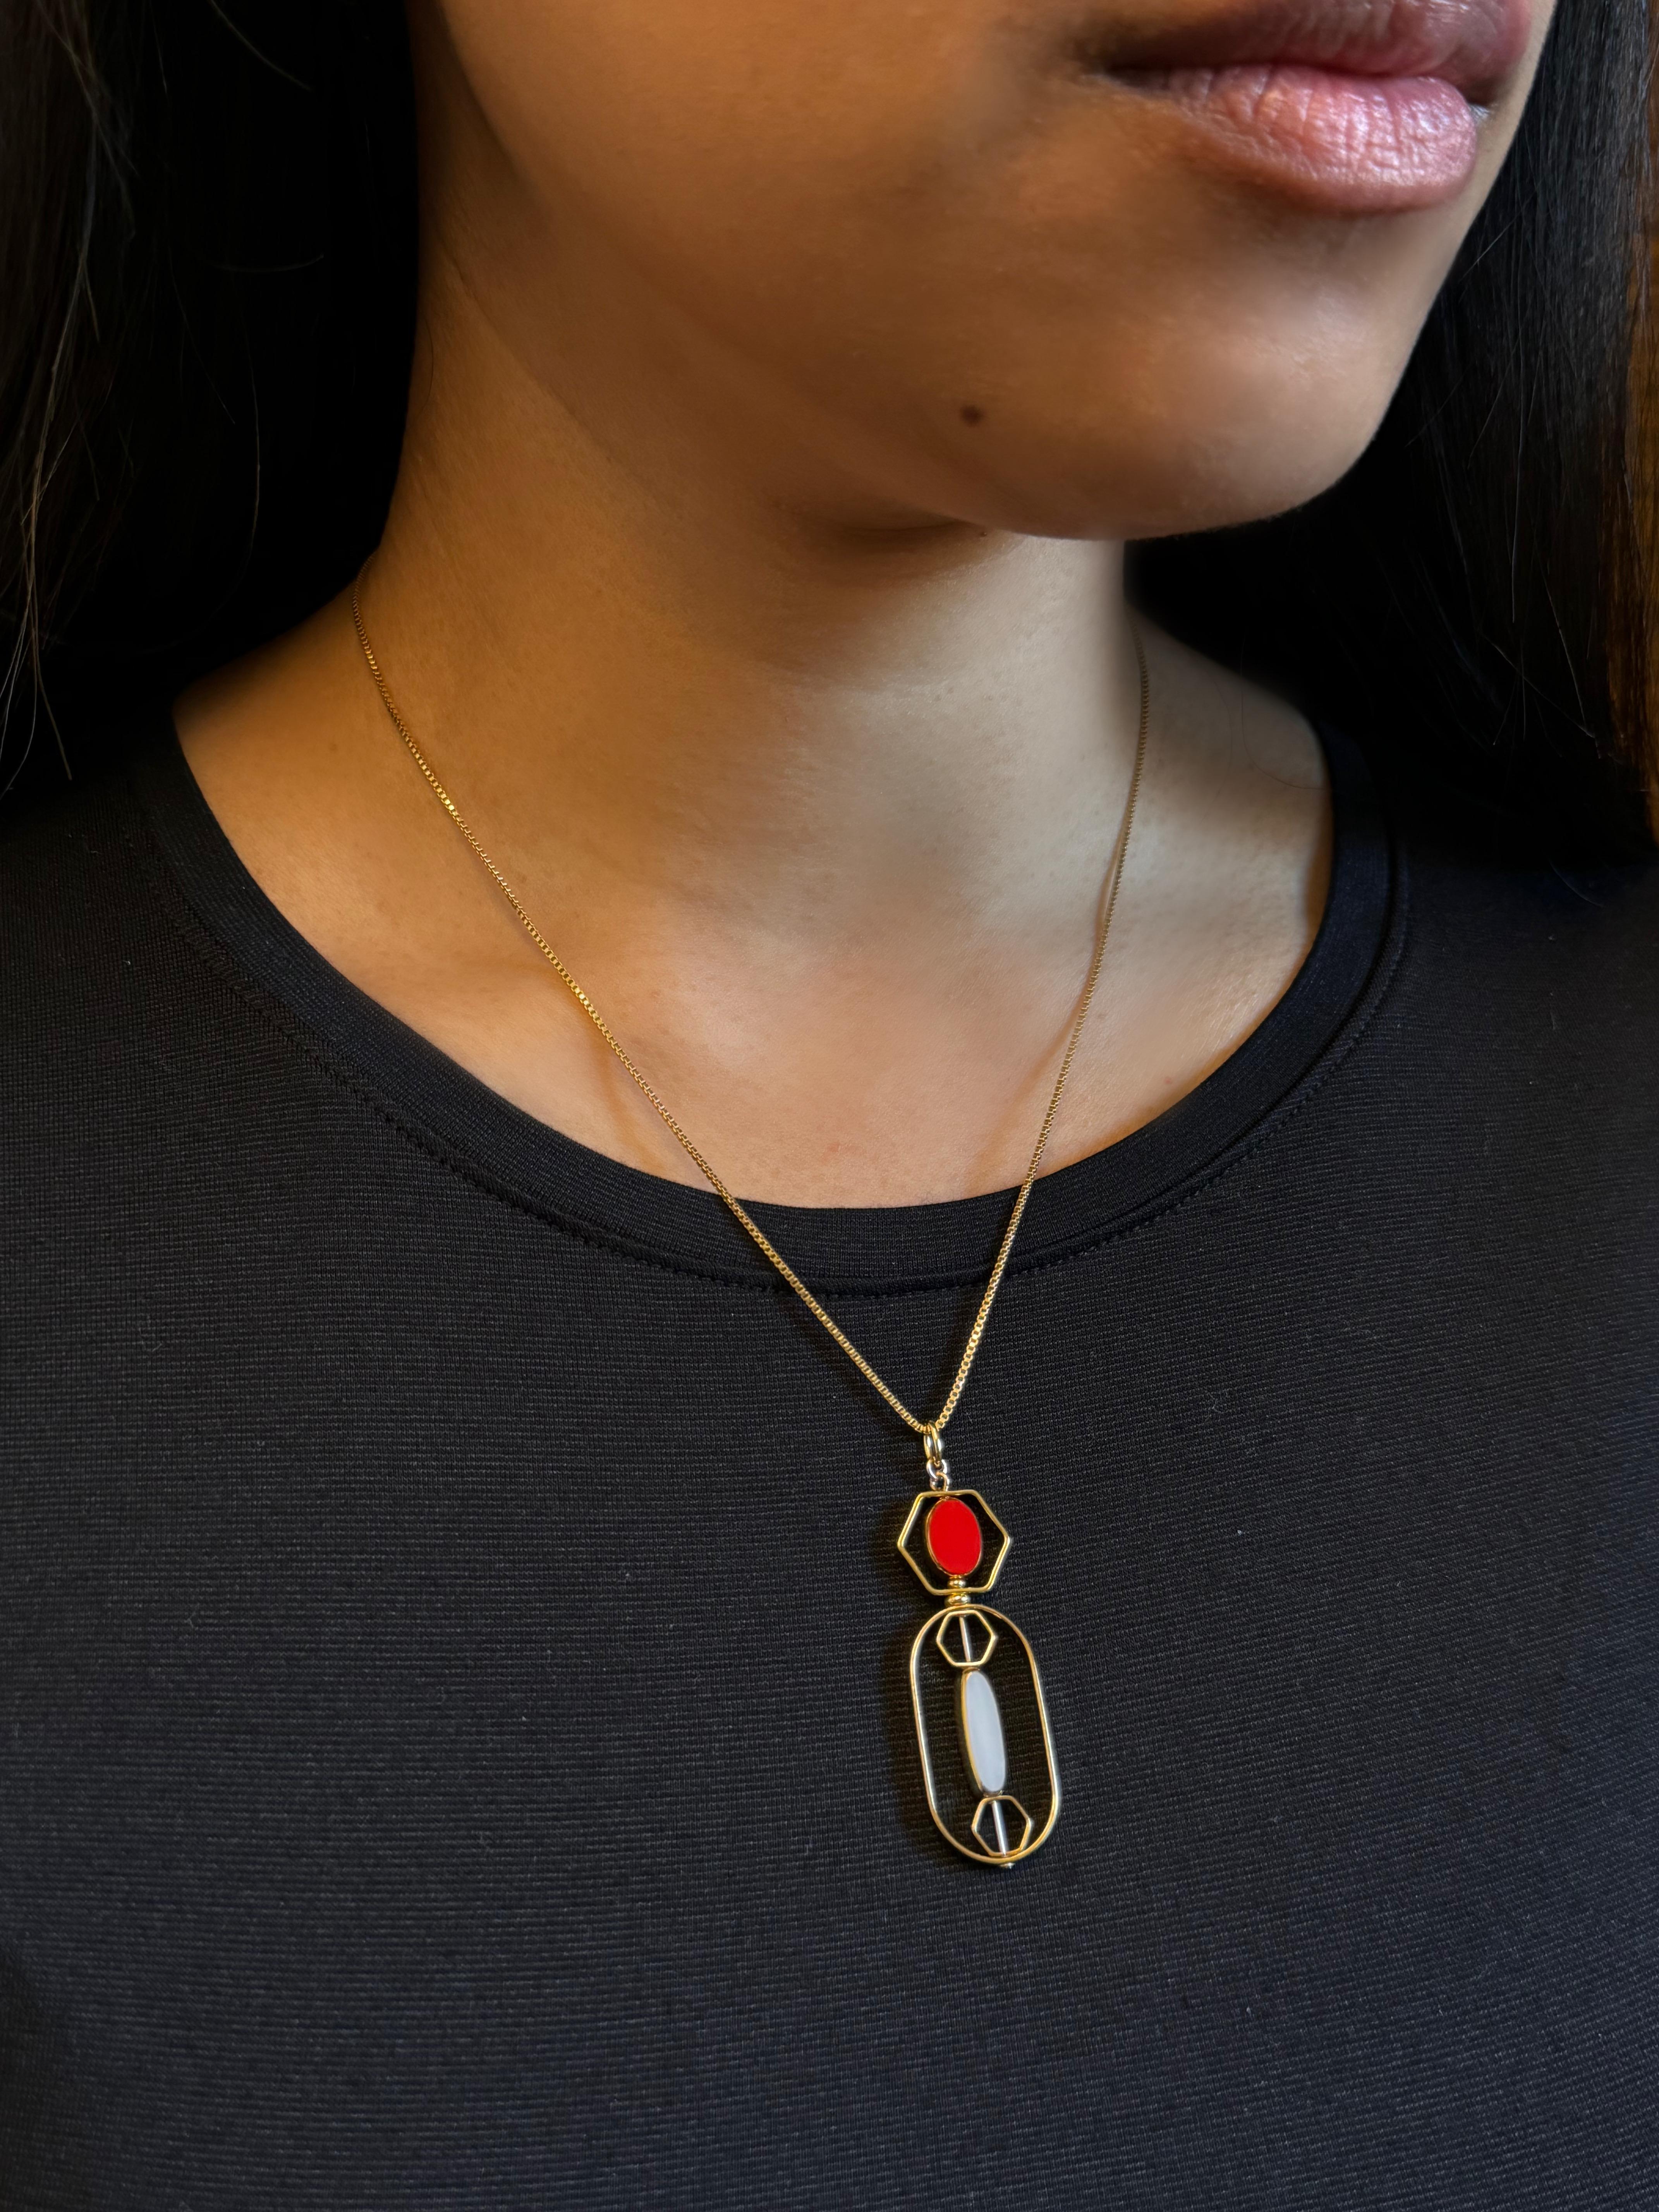 The pendant consists of small red oval and white long oval vintage German glass beads and is finished with an 18-inch gold-filled chain. 

The beads are new old stock vintage German glass beads that are framed with 24K gold. The beads were